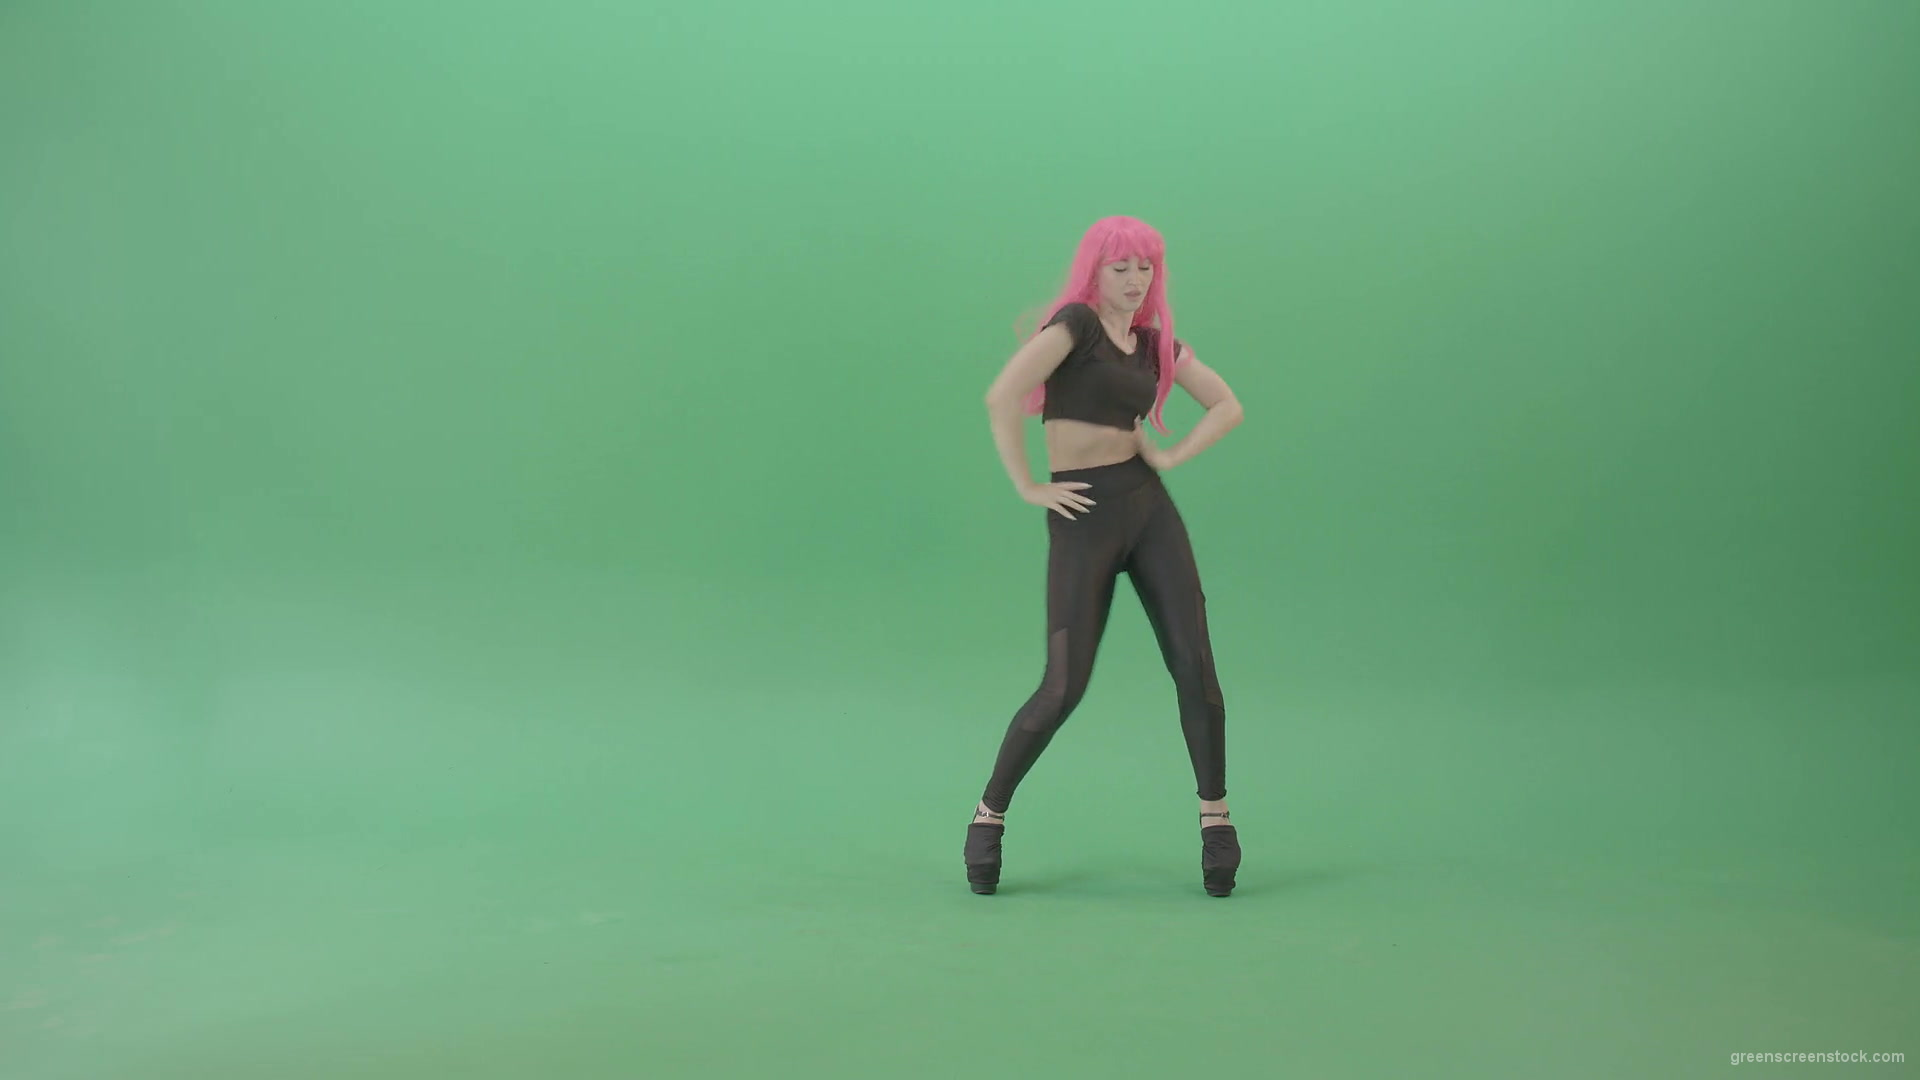 Pink-hair-girl-showing-sexy-moves-dancing-strip-on-green-screen-4K-Video-Footage-1920_007 Green Screen Stock